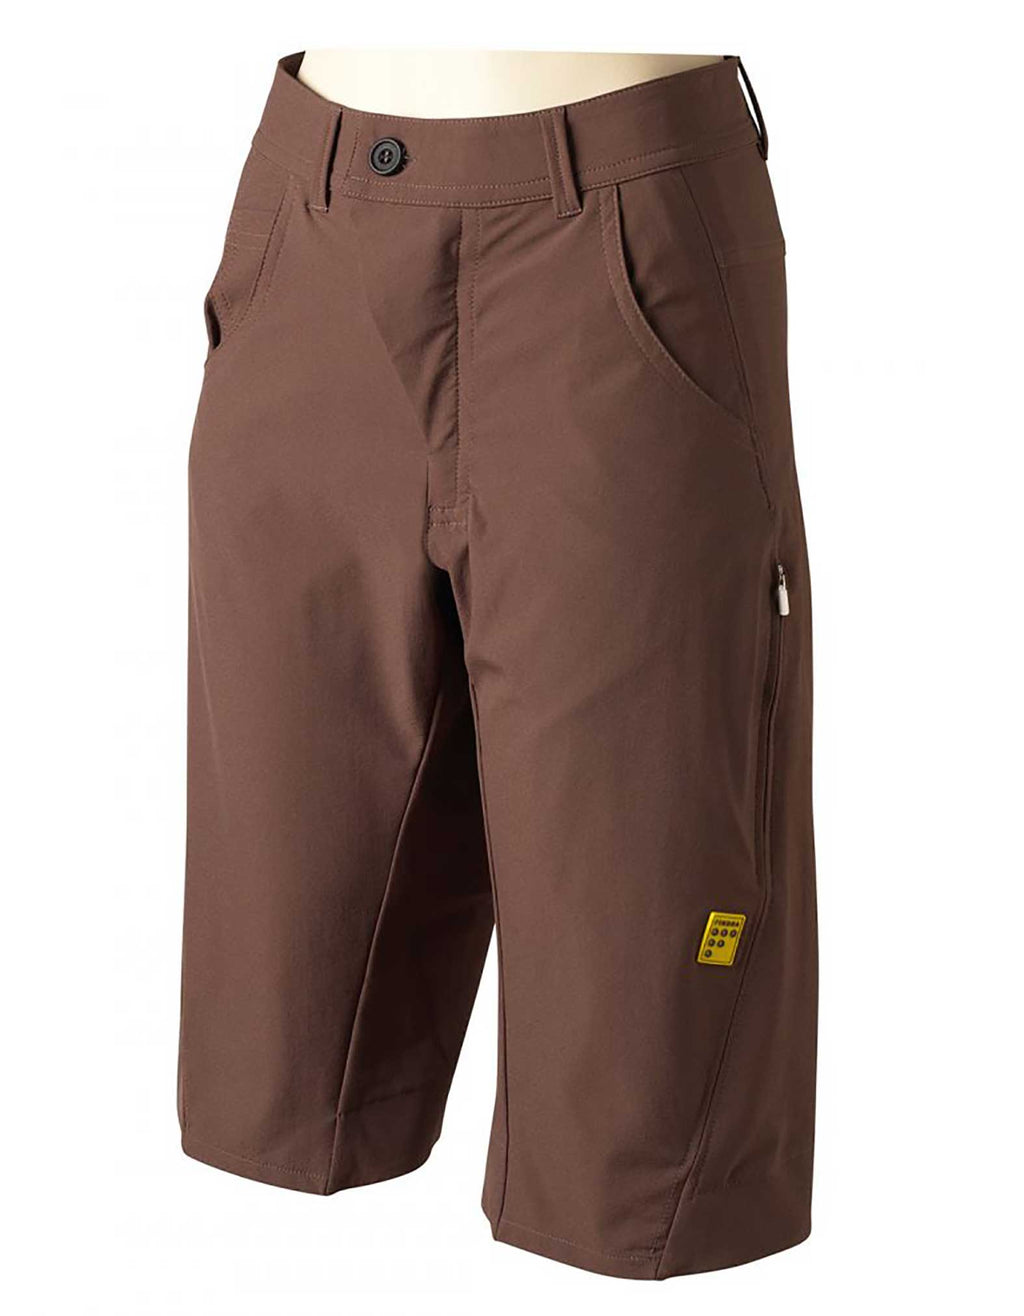 Findra Women's Relaxed Fit Mountain Bike Shorts - Chocolate